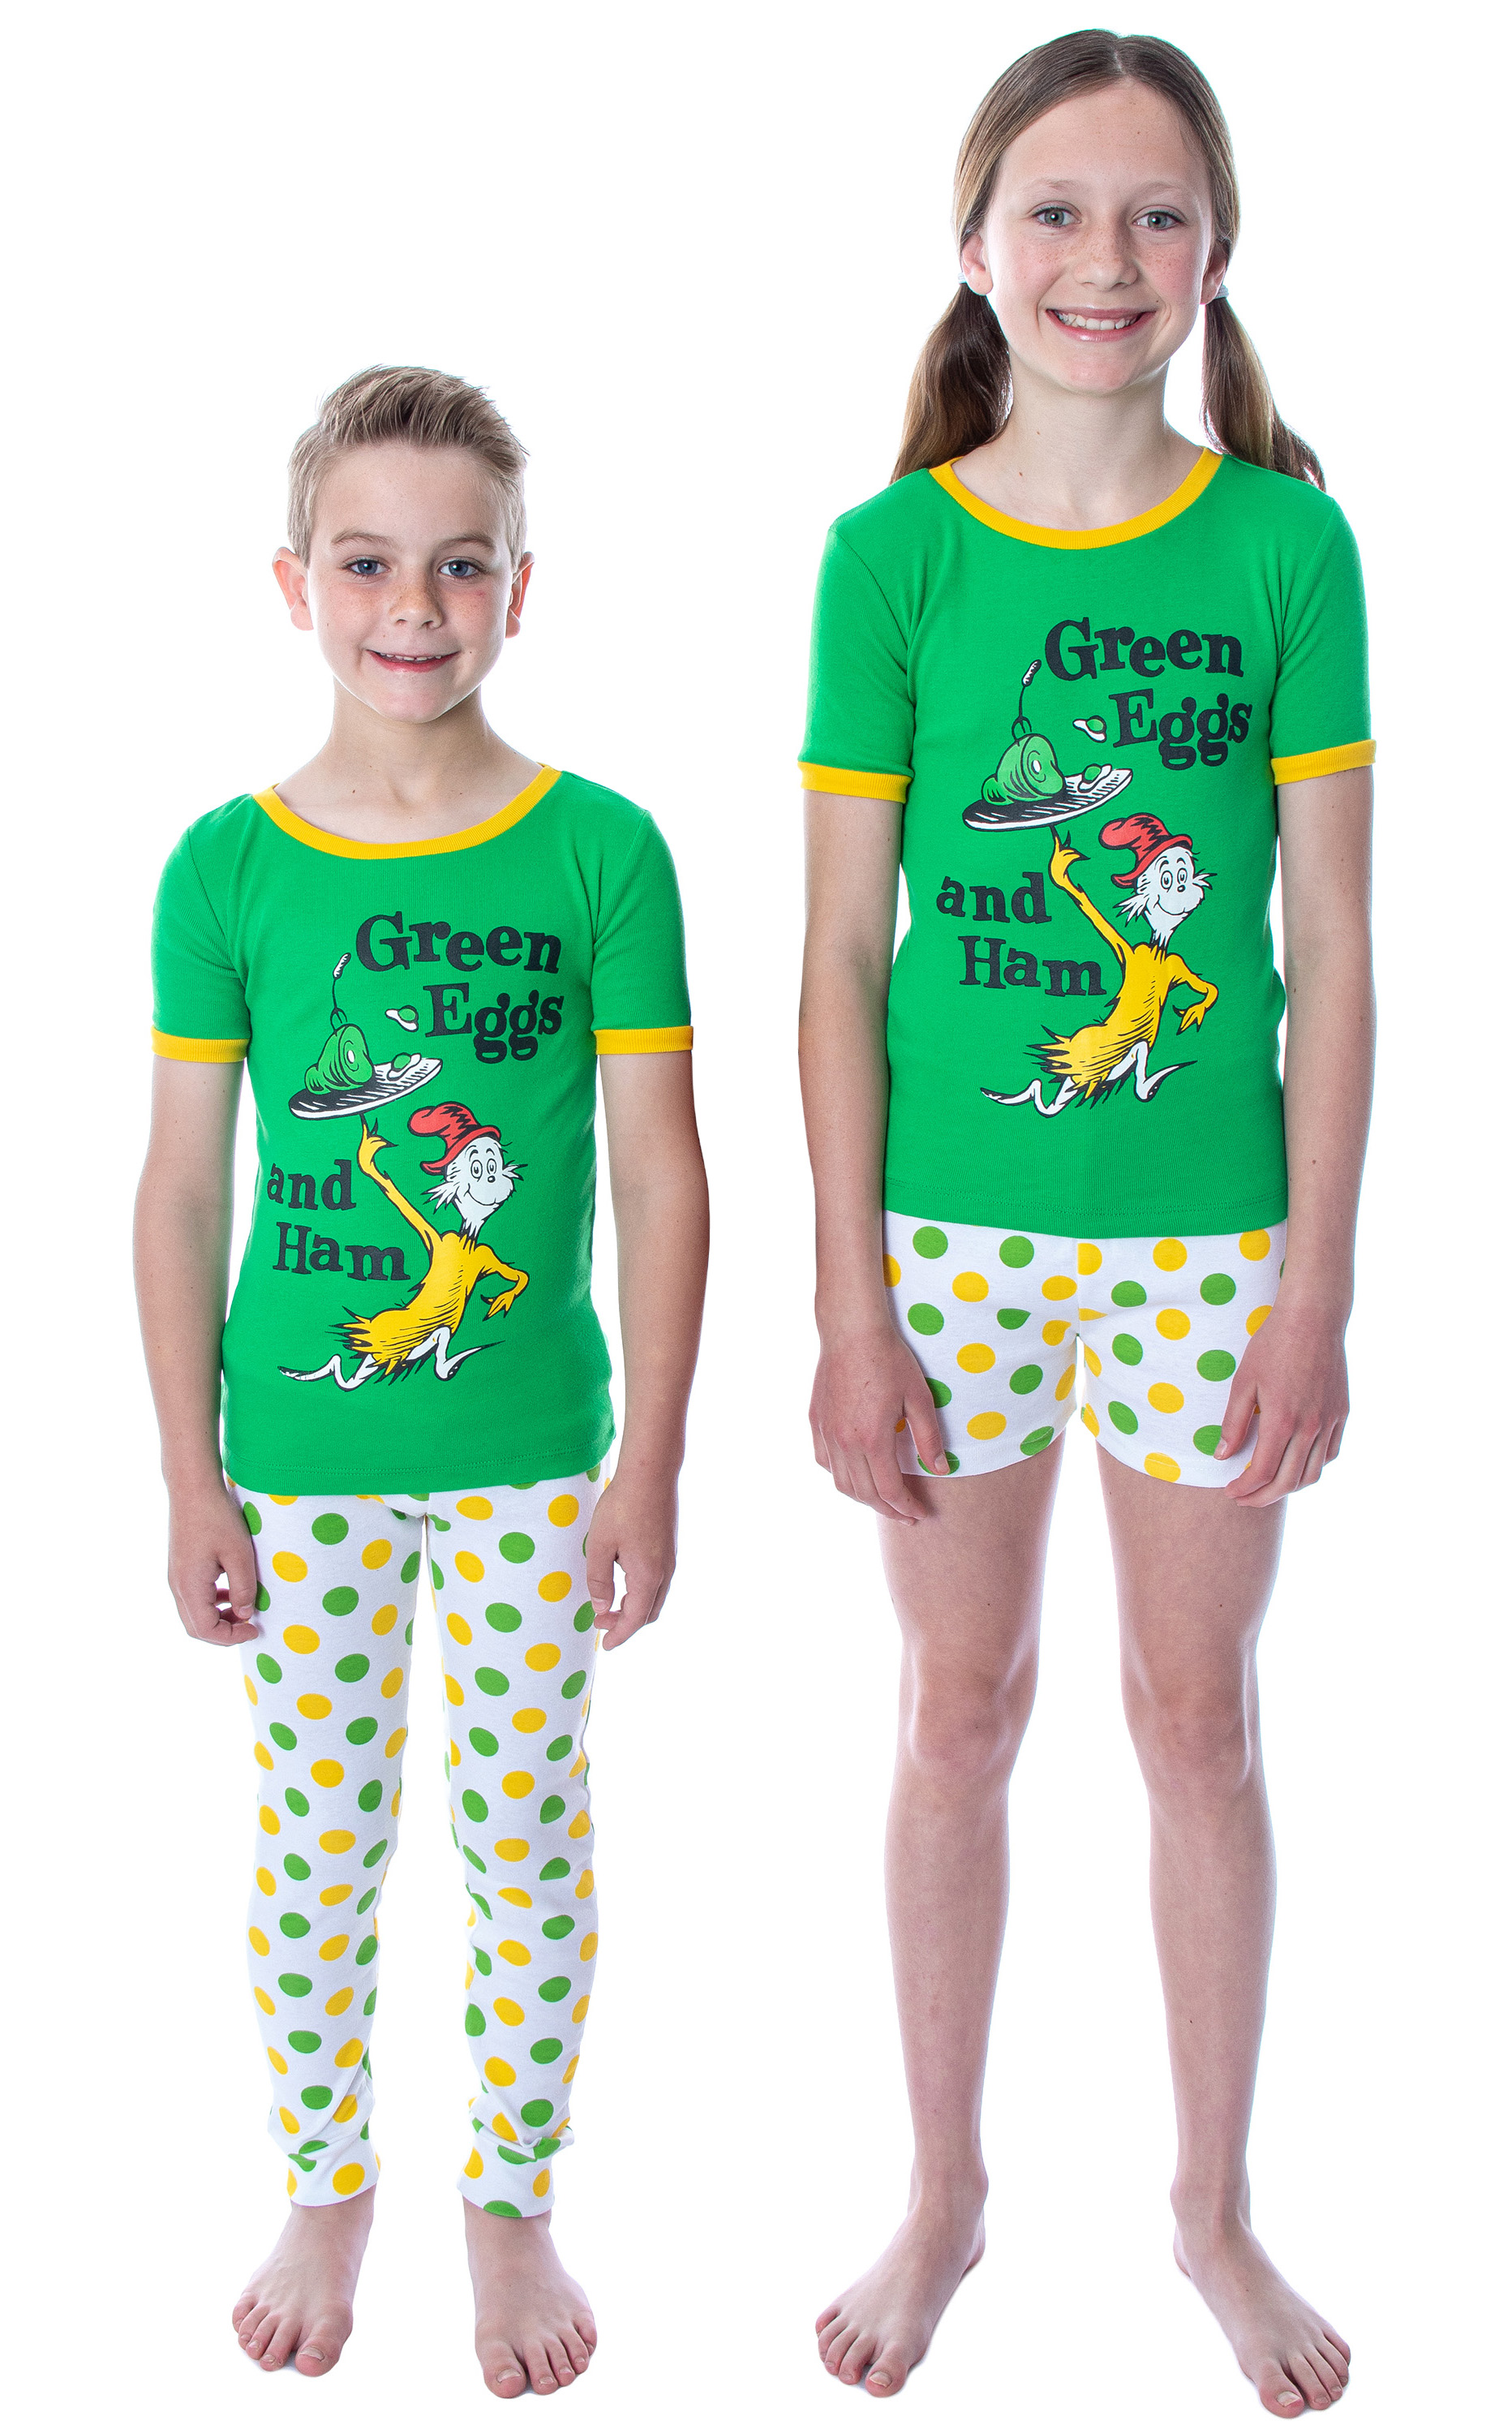 Seven Times Six Dr. Seuss Unisex Kids Green Eggs and Ham Shirt Shorts and Pants 3 Piece Pajama Set For Boys and Girls